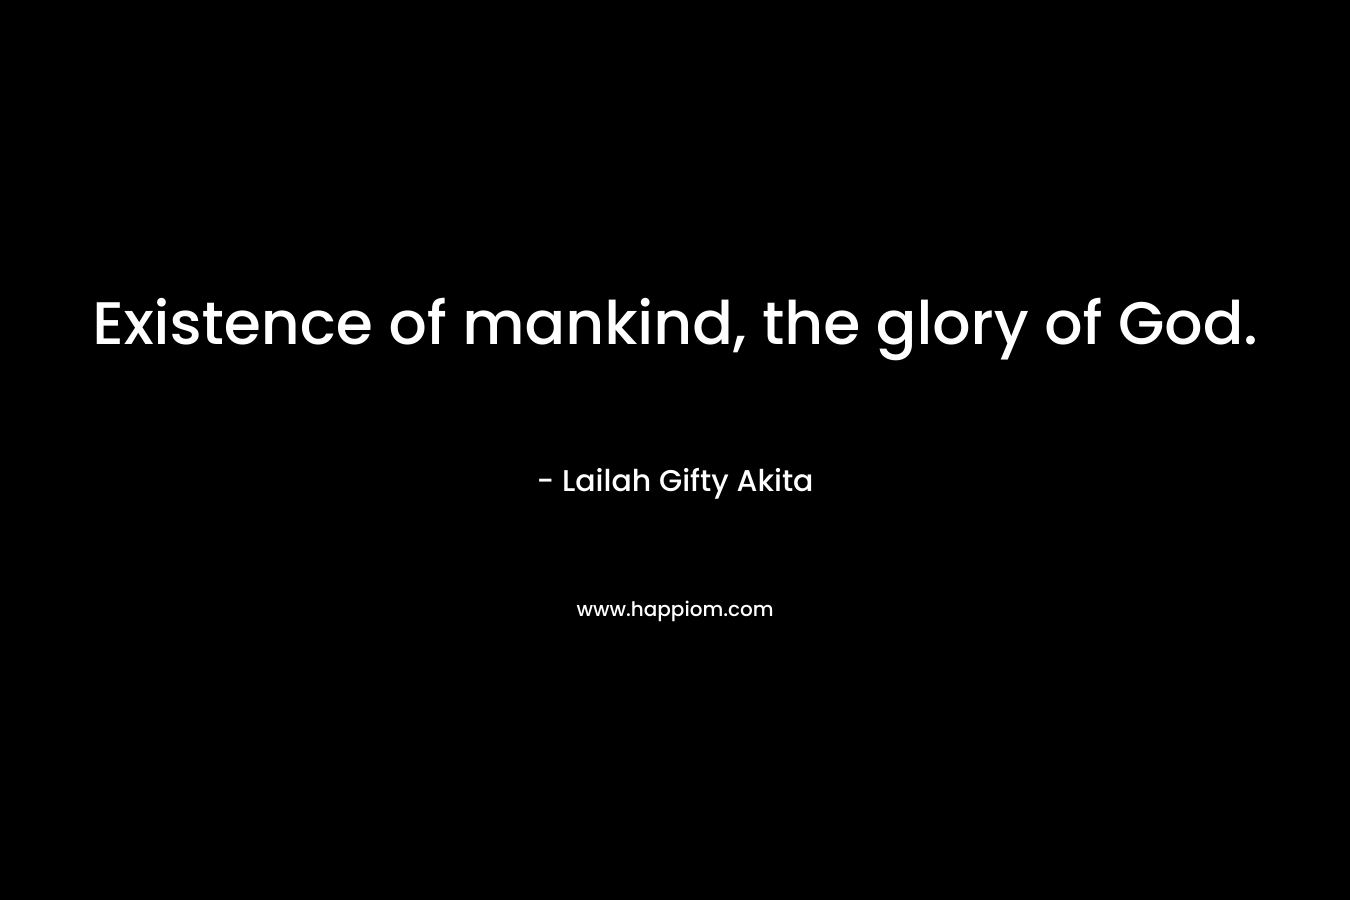 Existence of mankind, the glory of God.